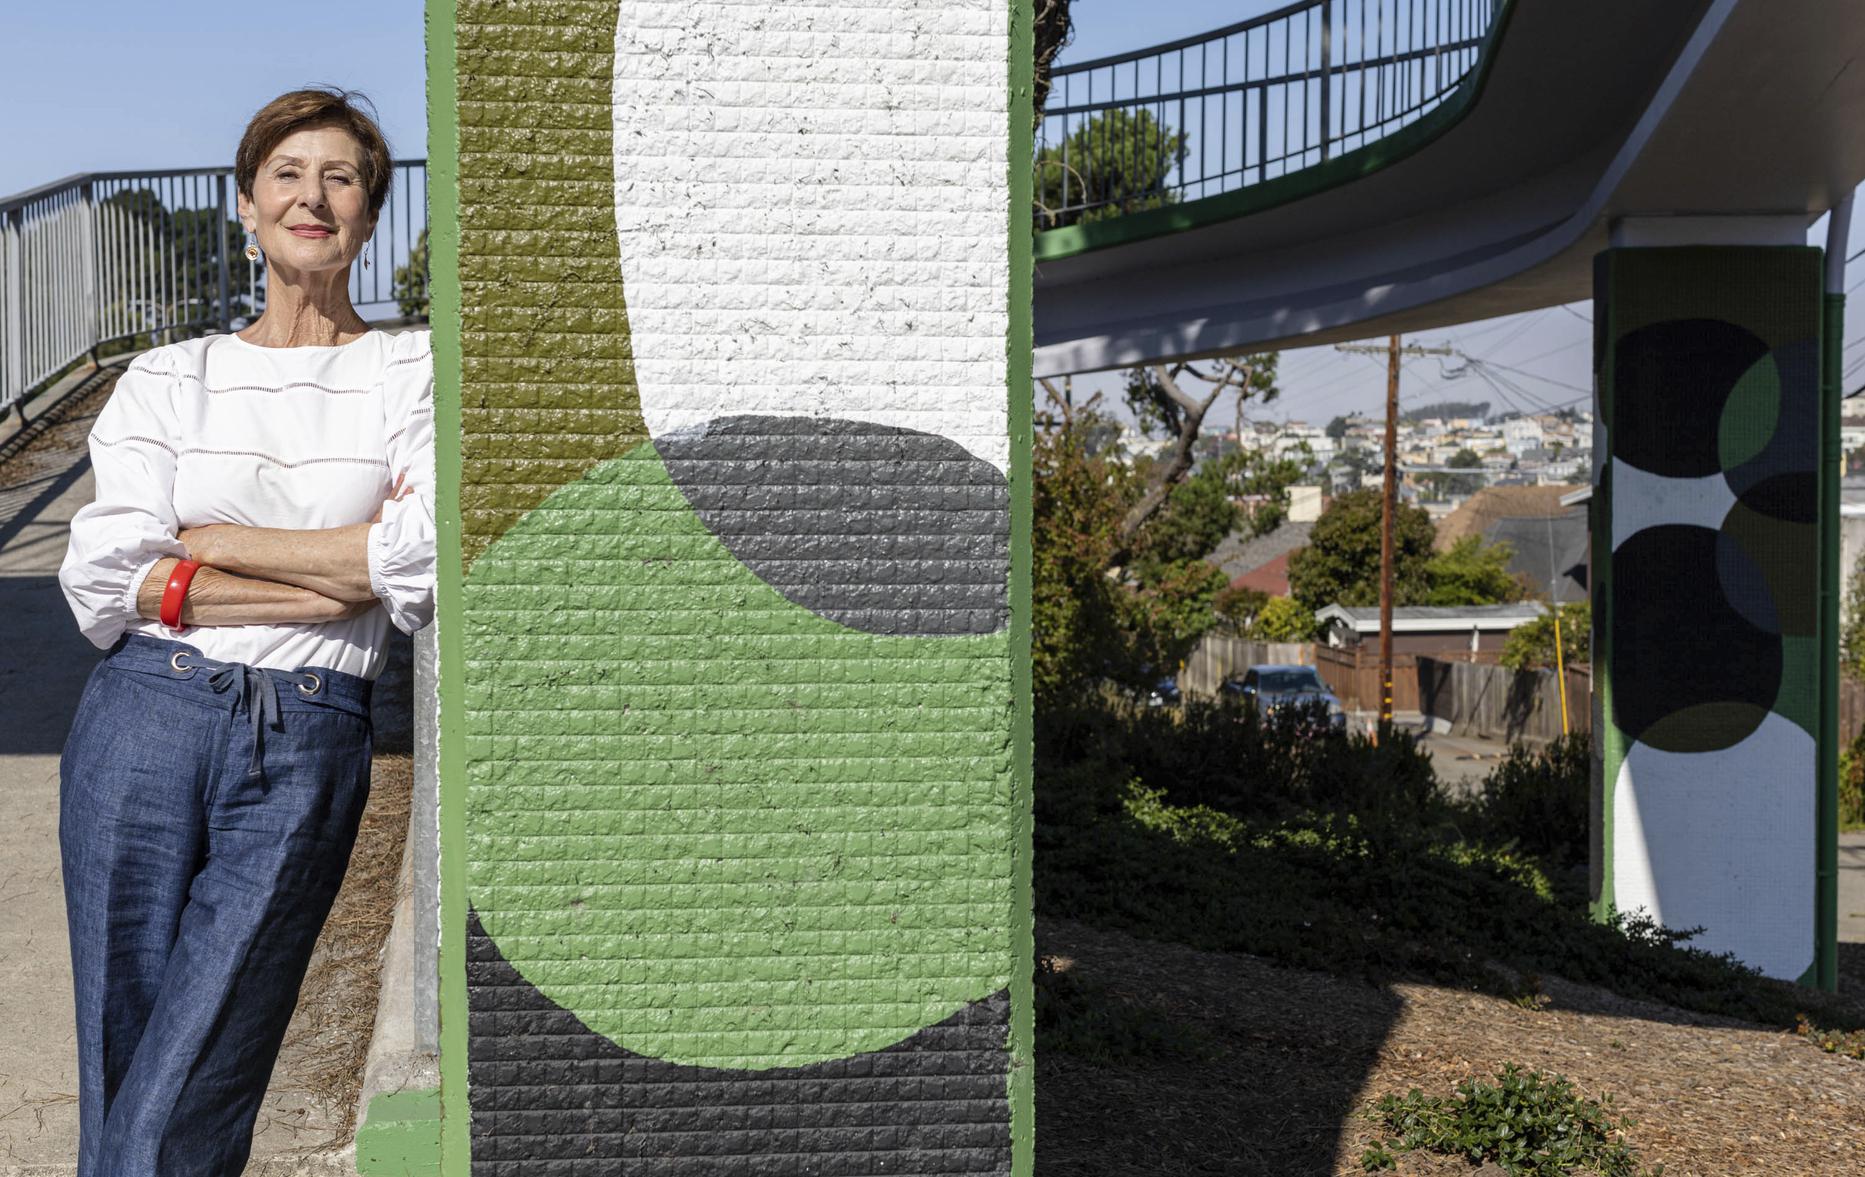 How this S.F. neighborhood group helped turn a decrepit city bridge into a public art project